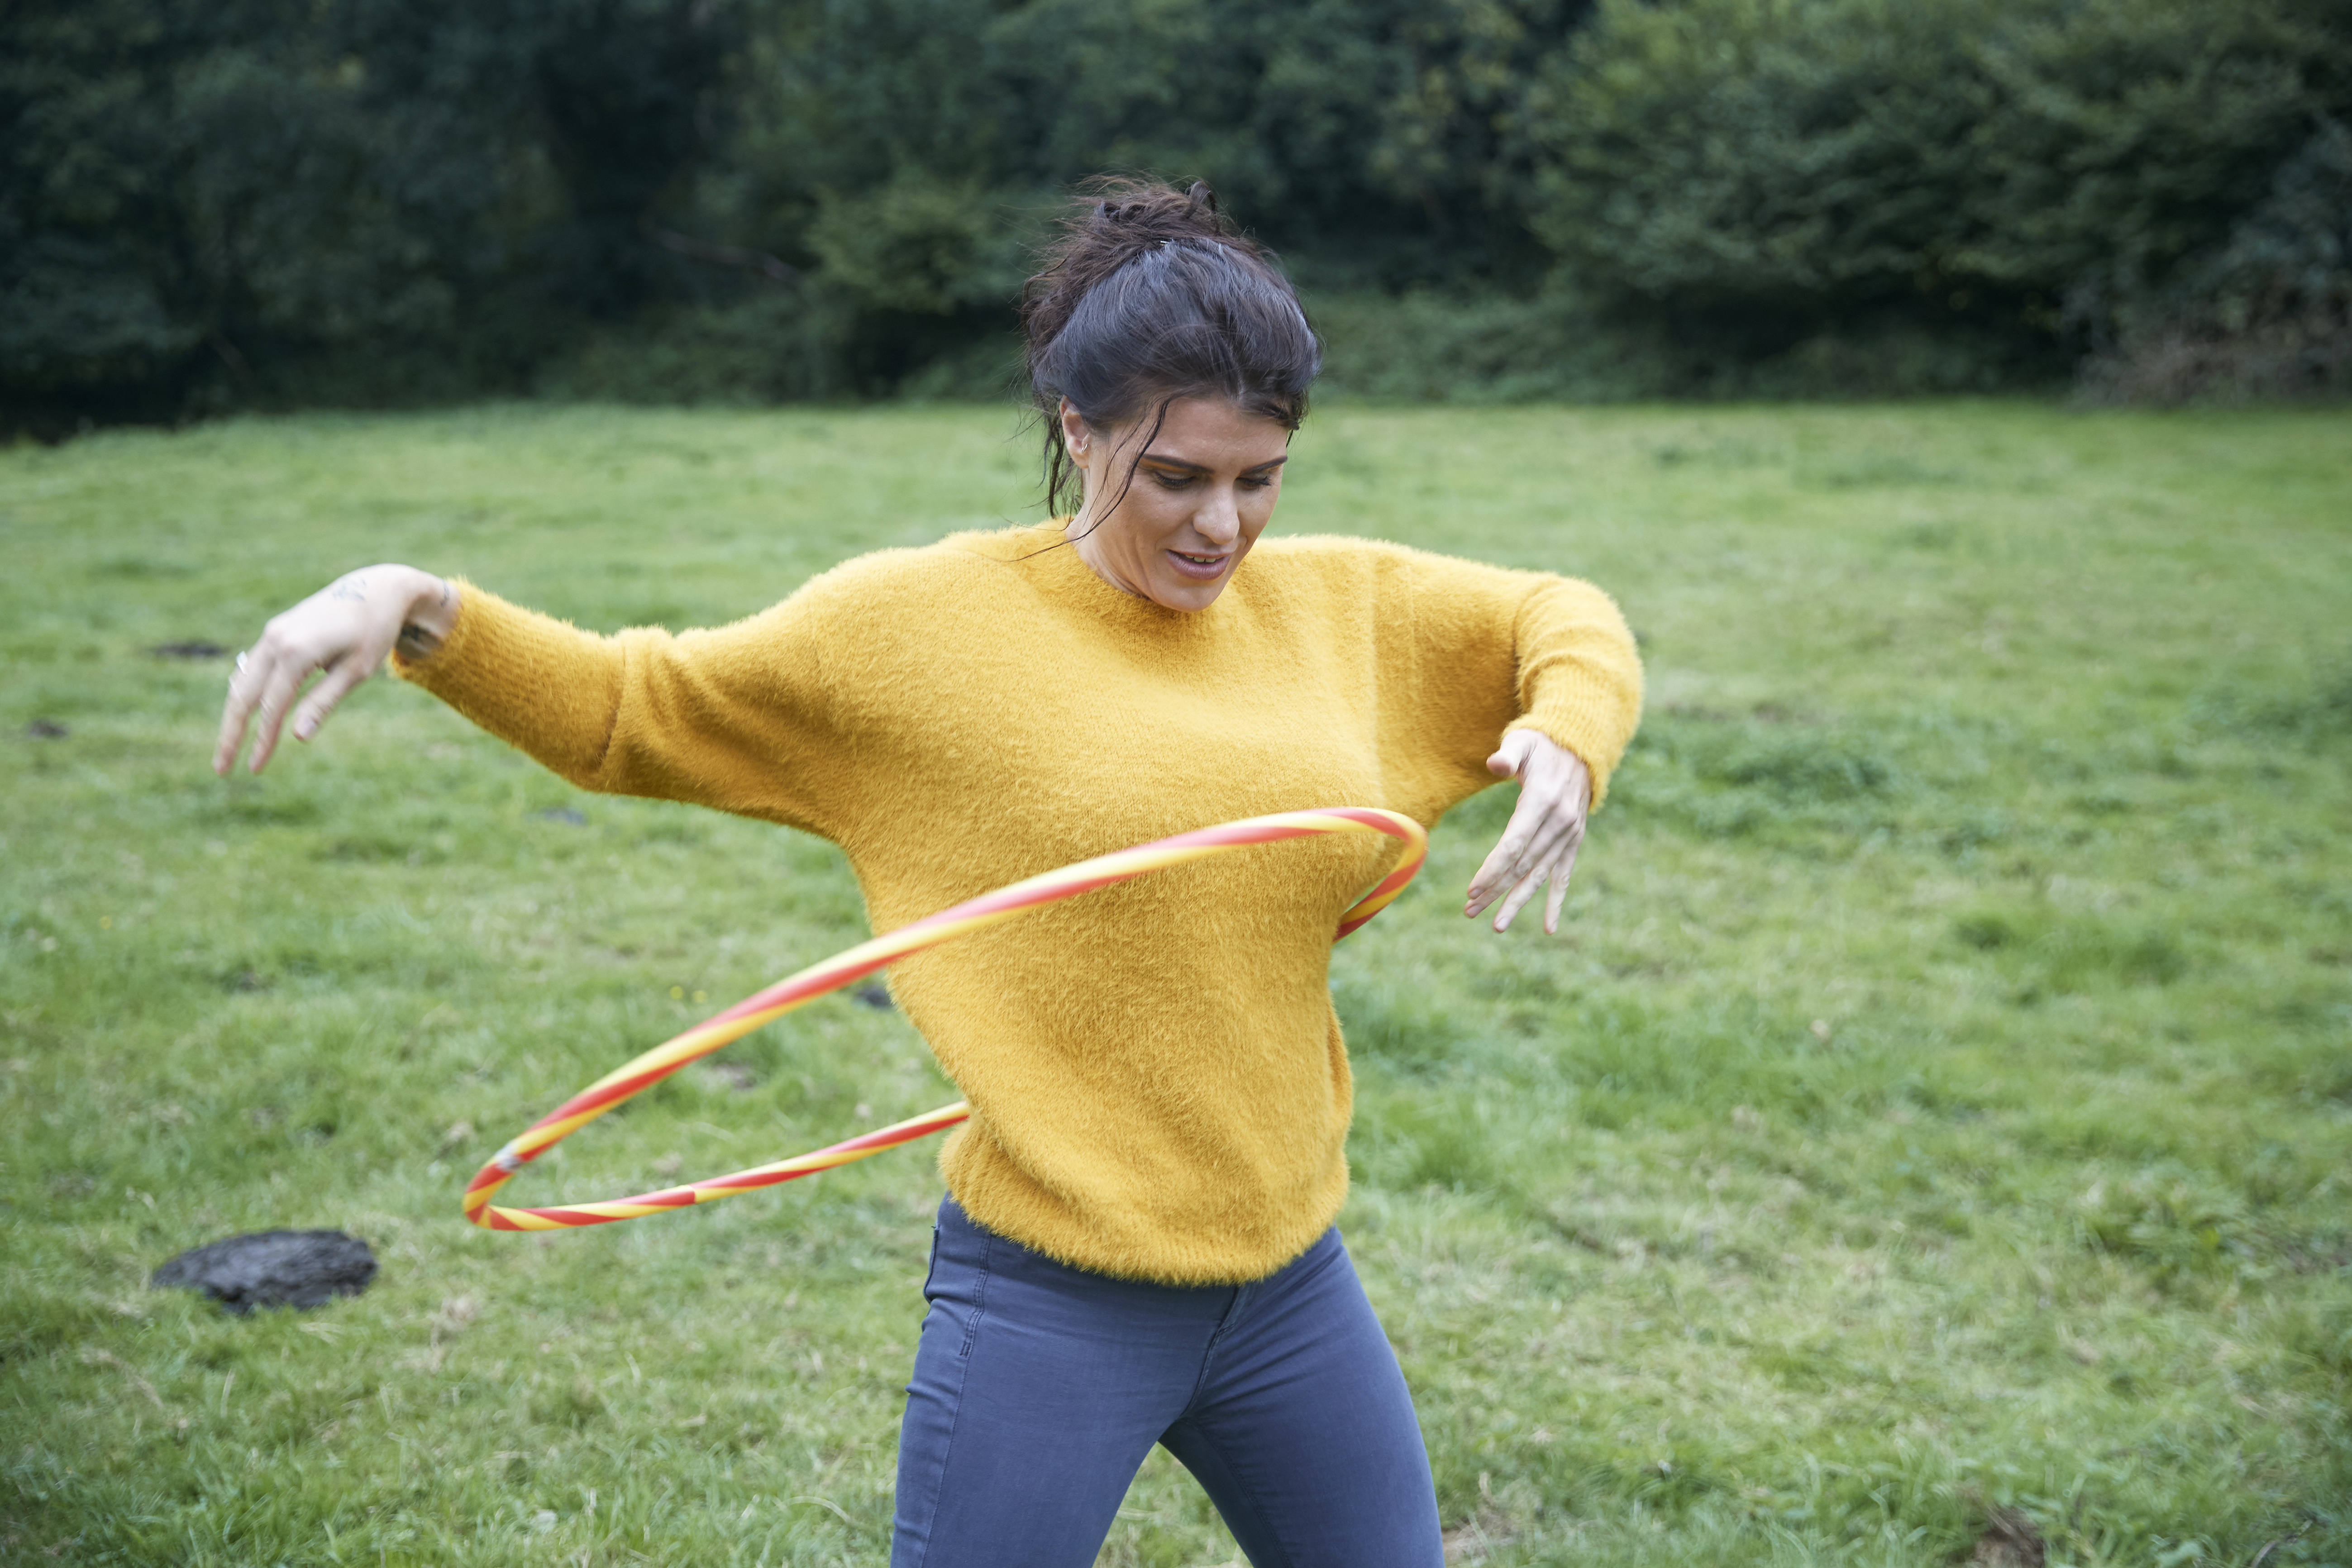 What is the Best Exercise for Belly Fat? - Hula Hoop Review